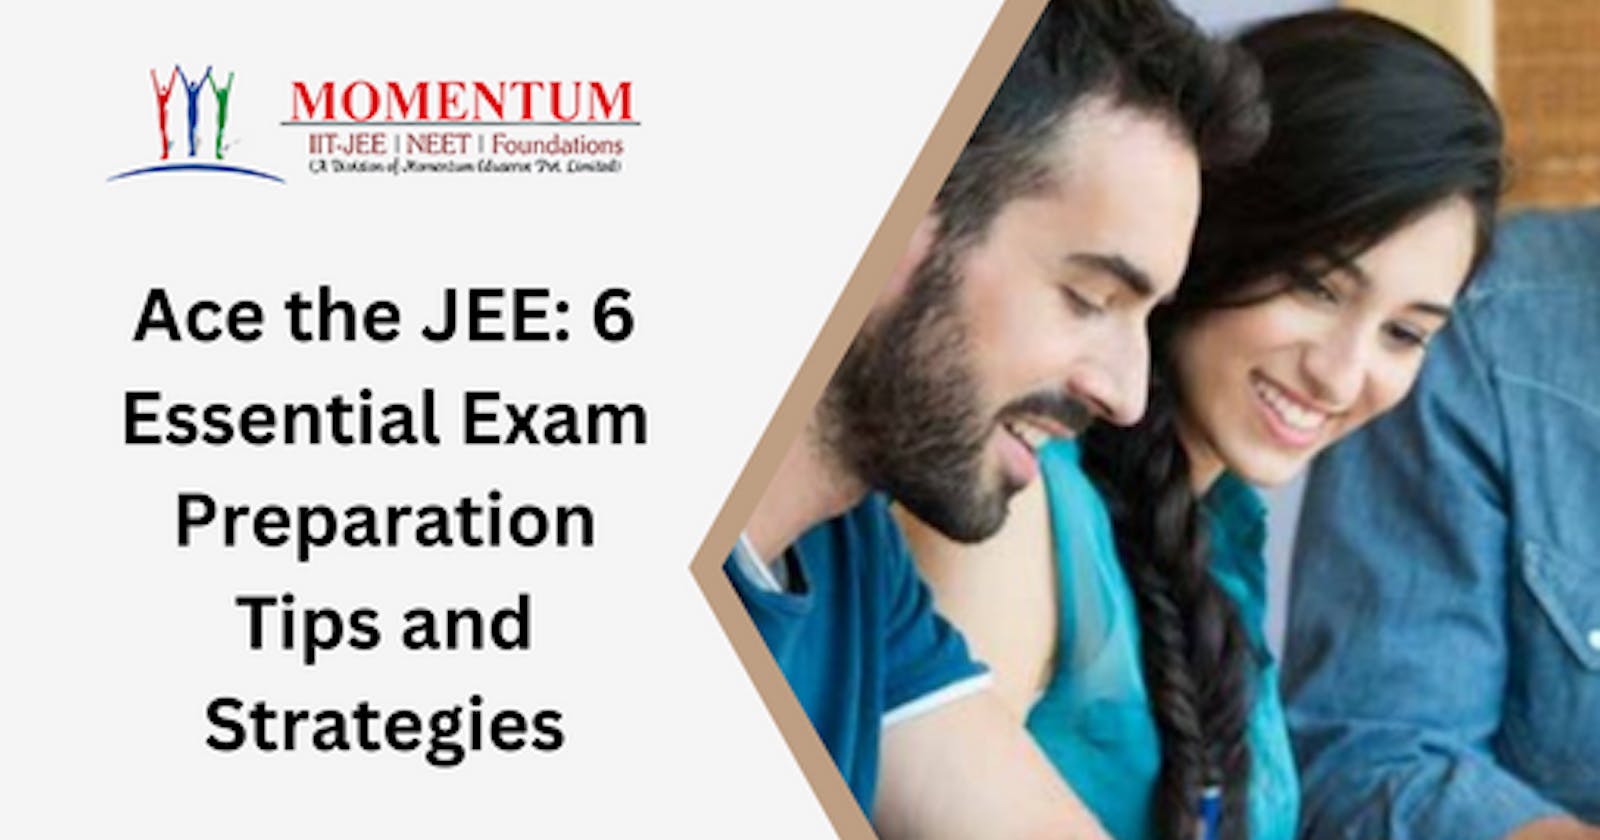 Ace the JEE: 6 Essential Exam Preparation Tips and Strategies